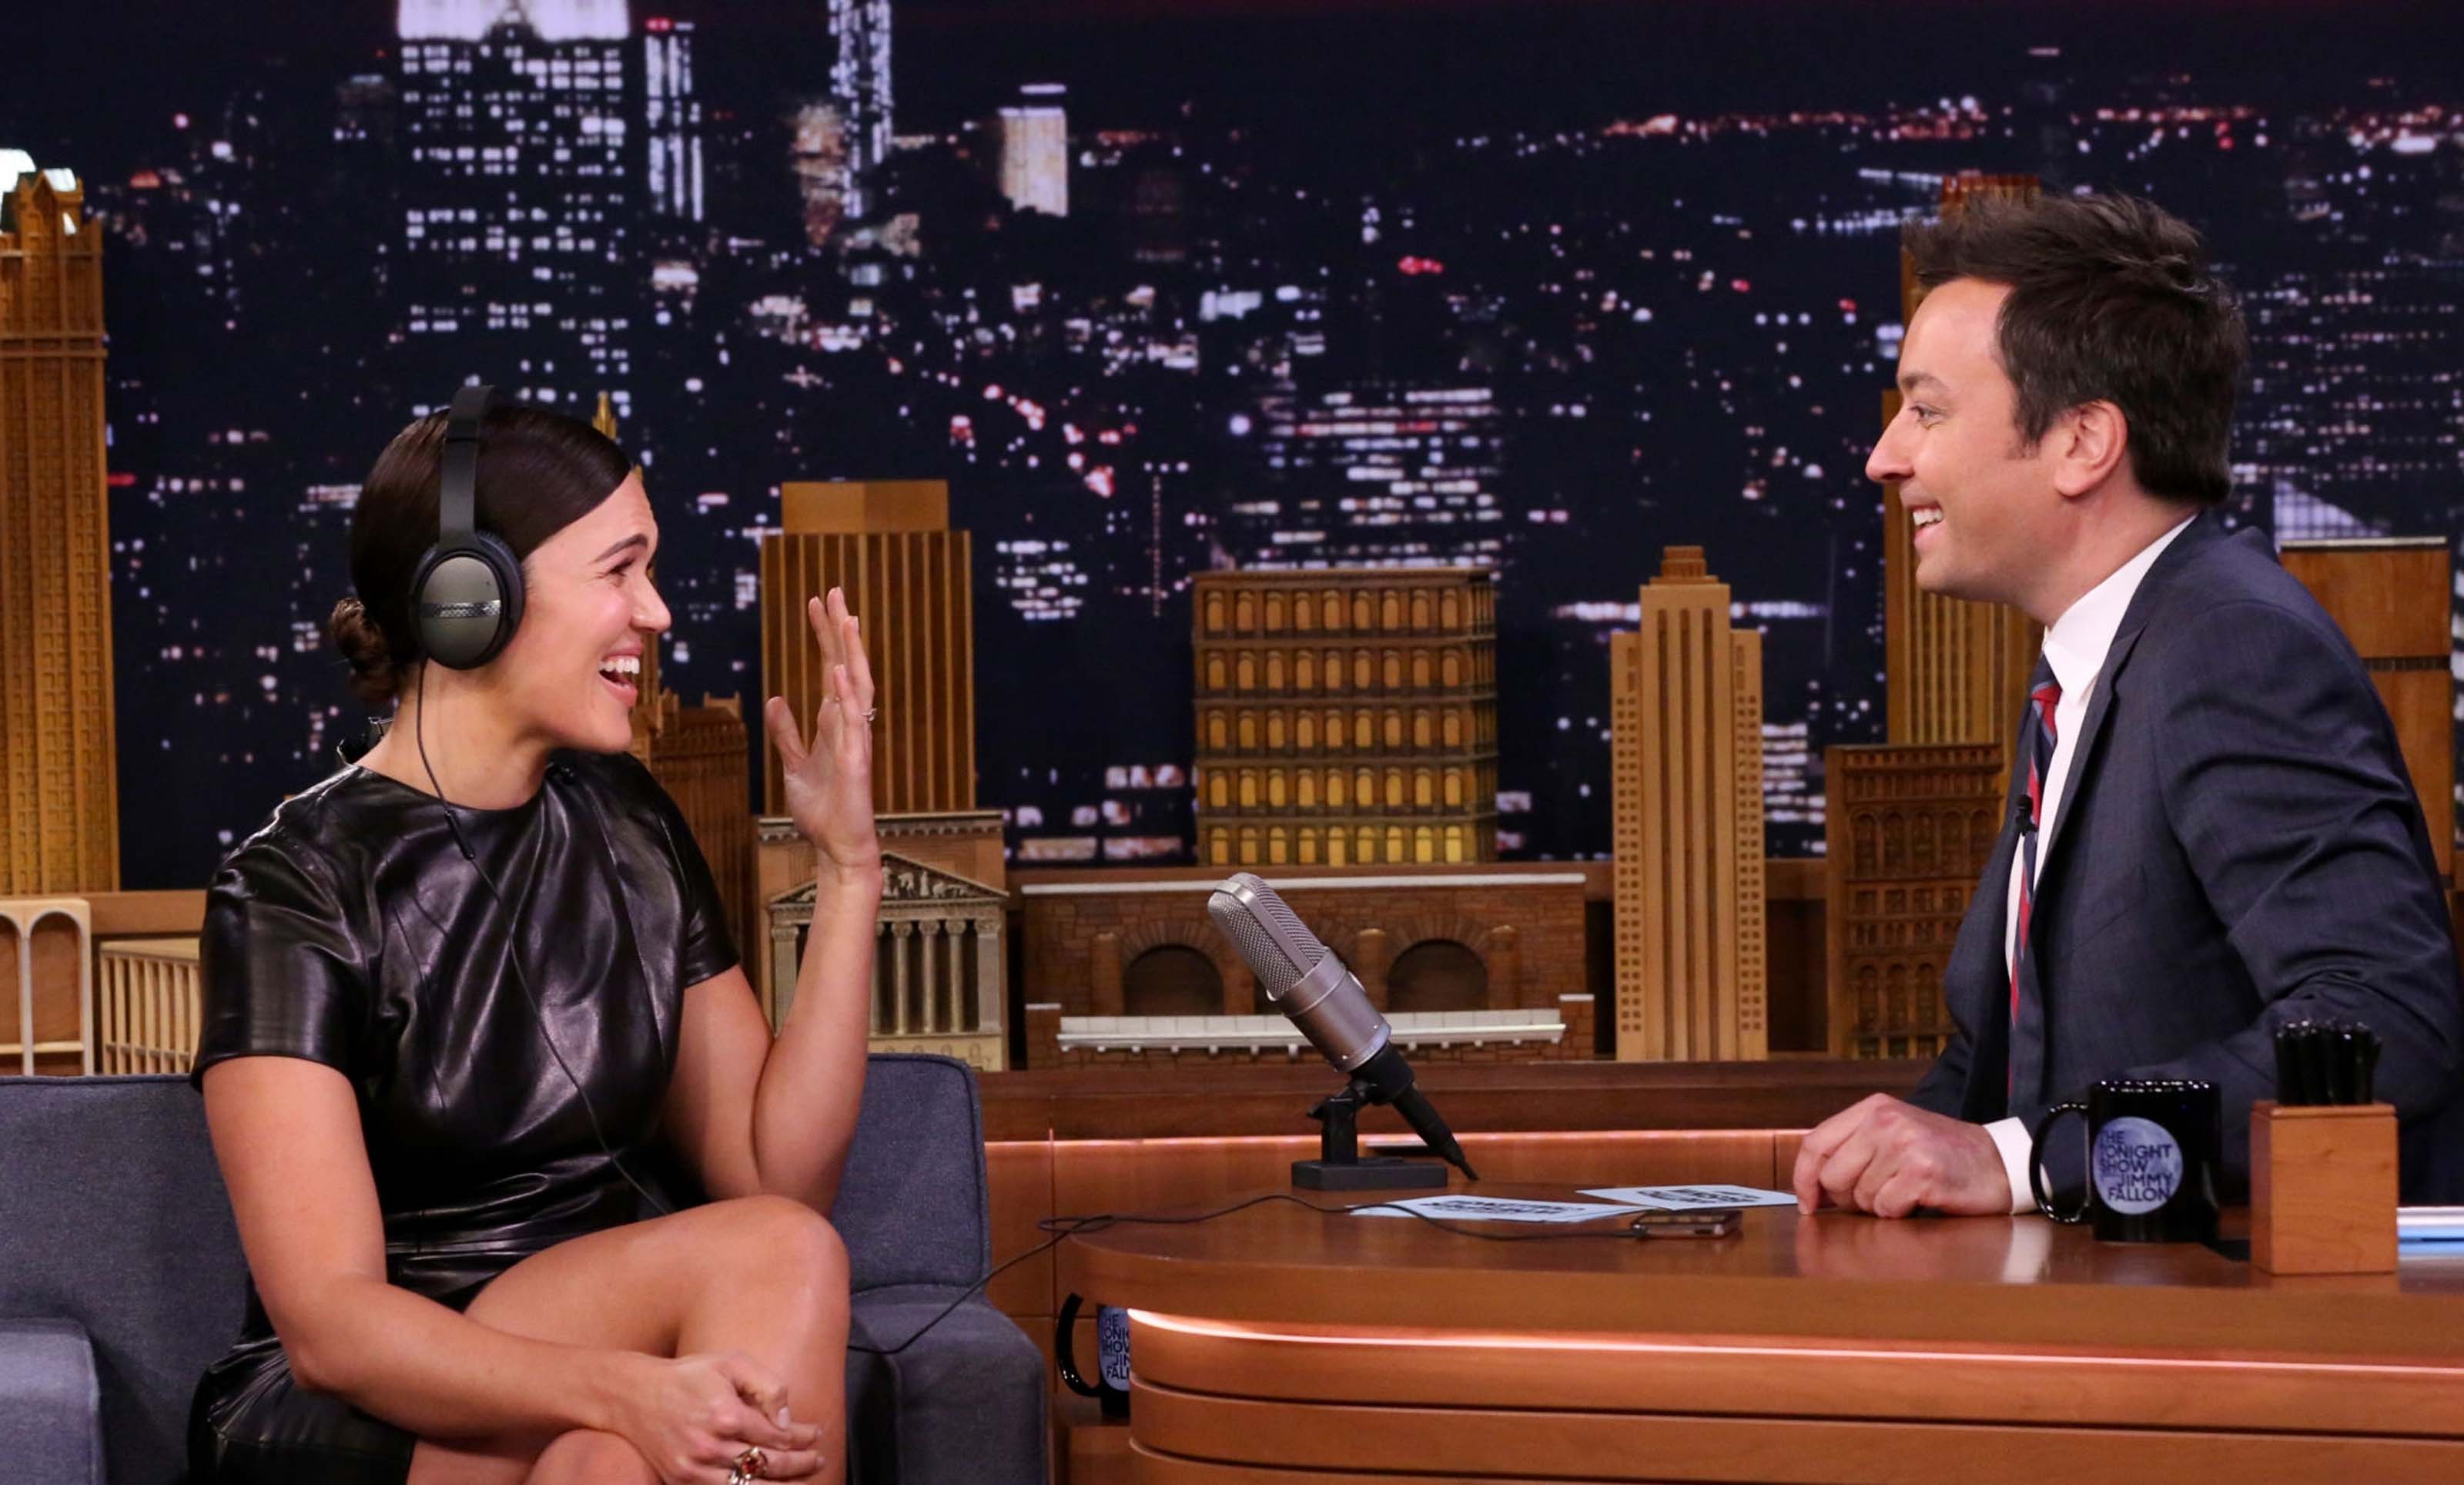 Mandy Moore visits The Tonight Show